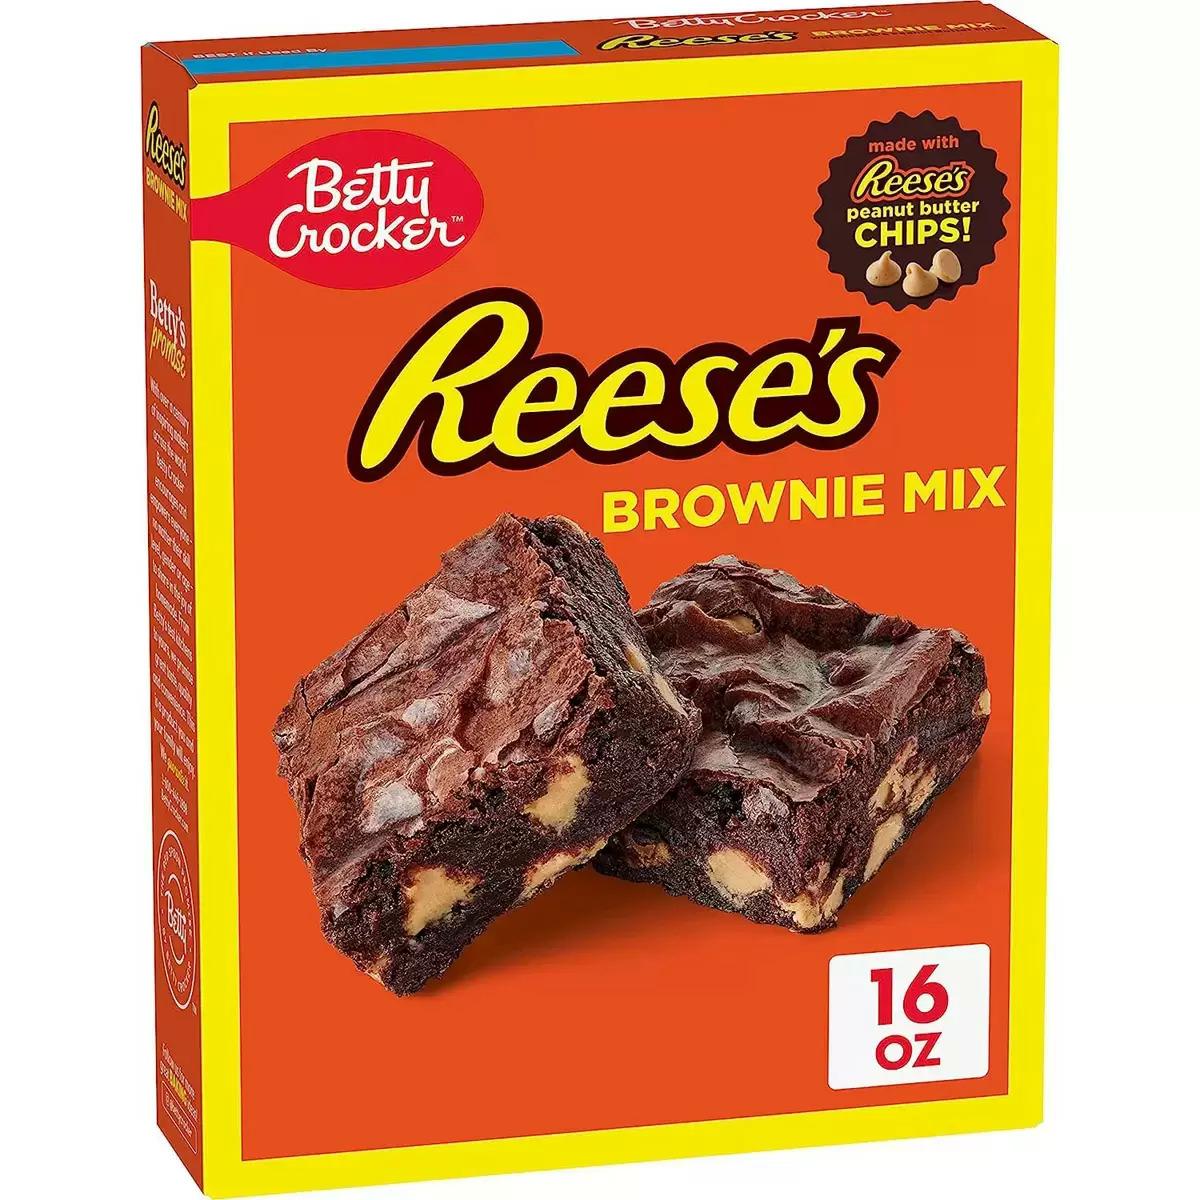 Betty Crocker Reeses Peanut Butter Premium Brownie Mix for $2.73 Shipped